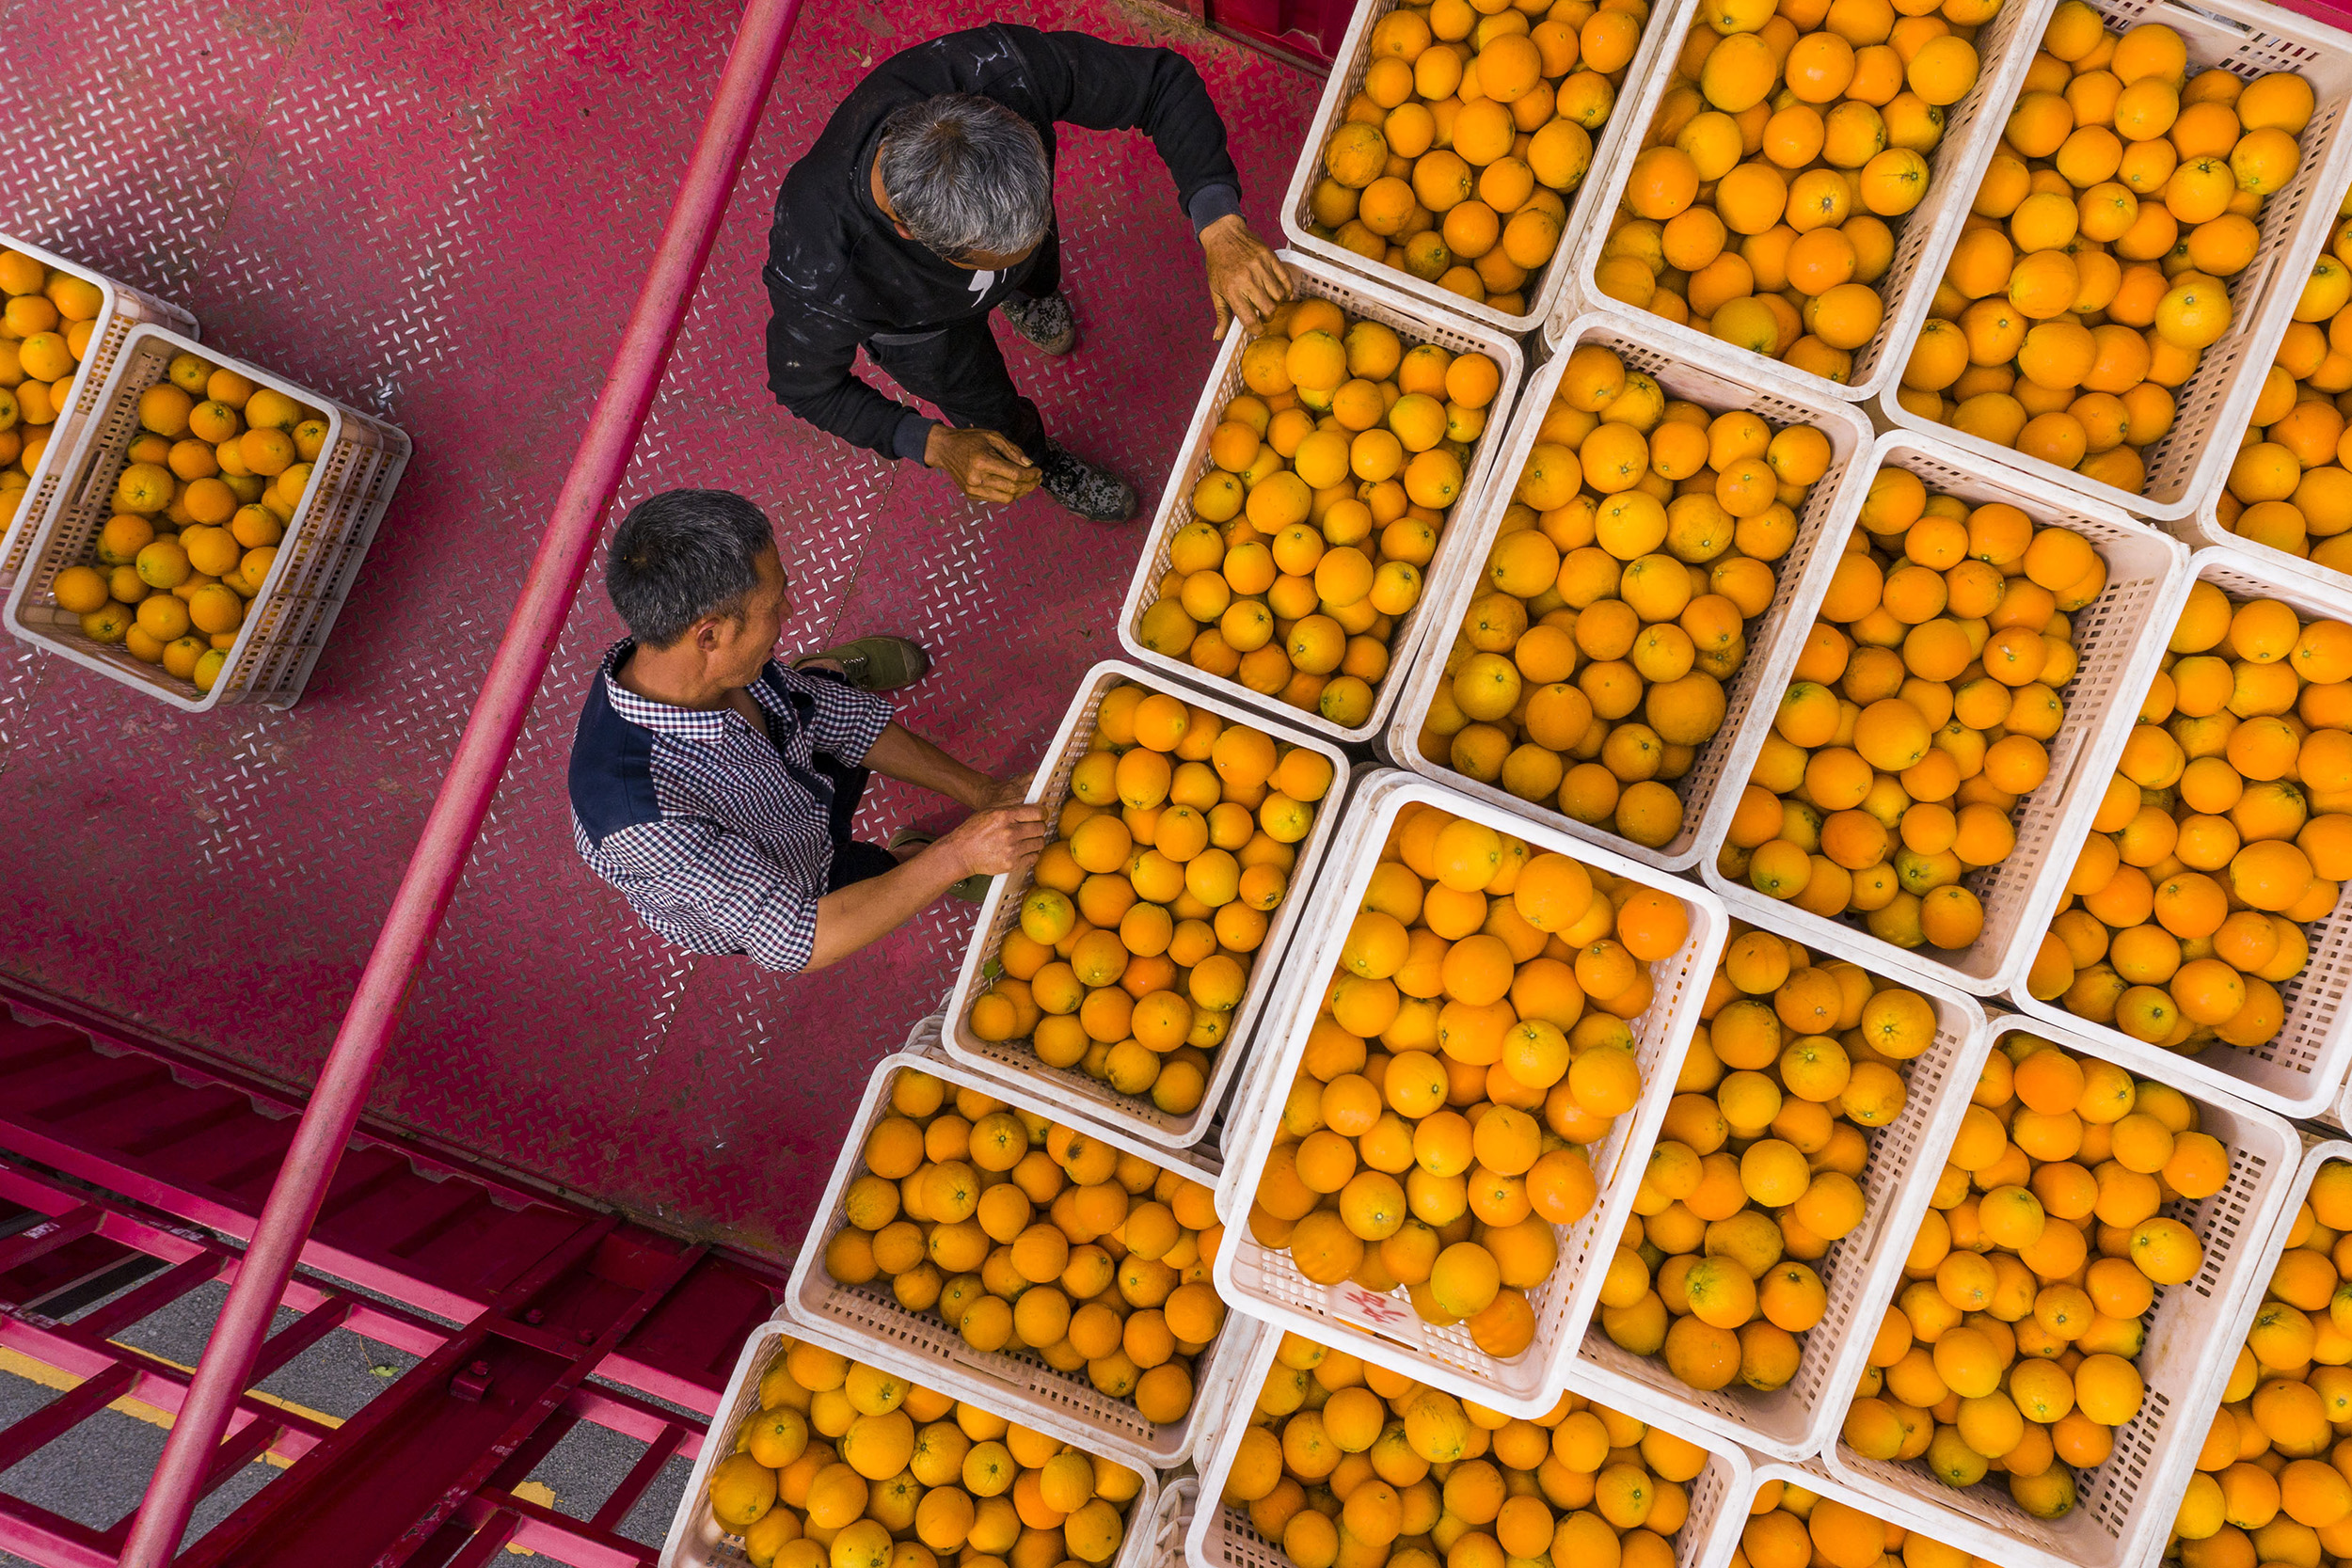 Farmers load crates of oranges onto a truck at an orchard on April 26, in Zigui County, Yichang City, Hubei Province of China. 